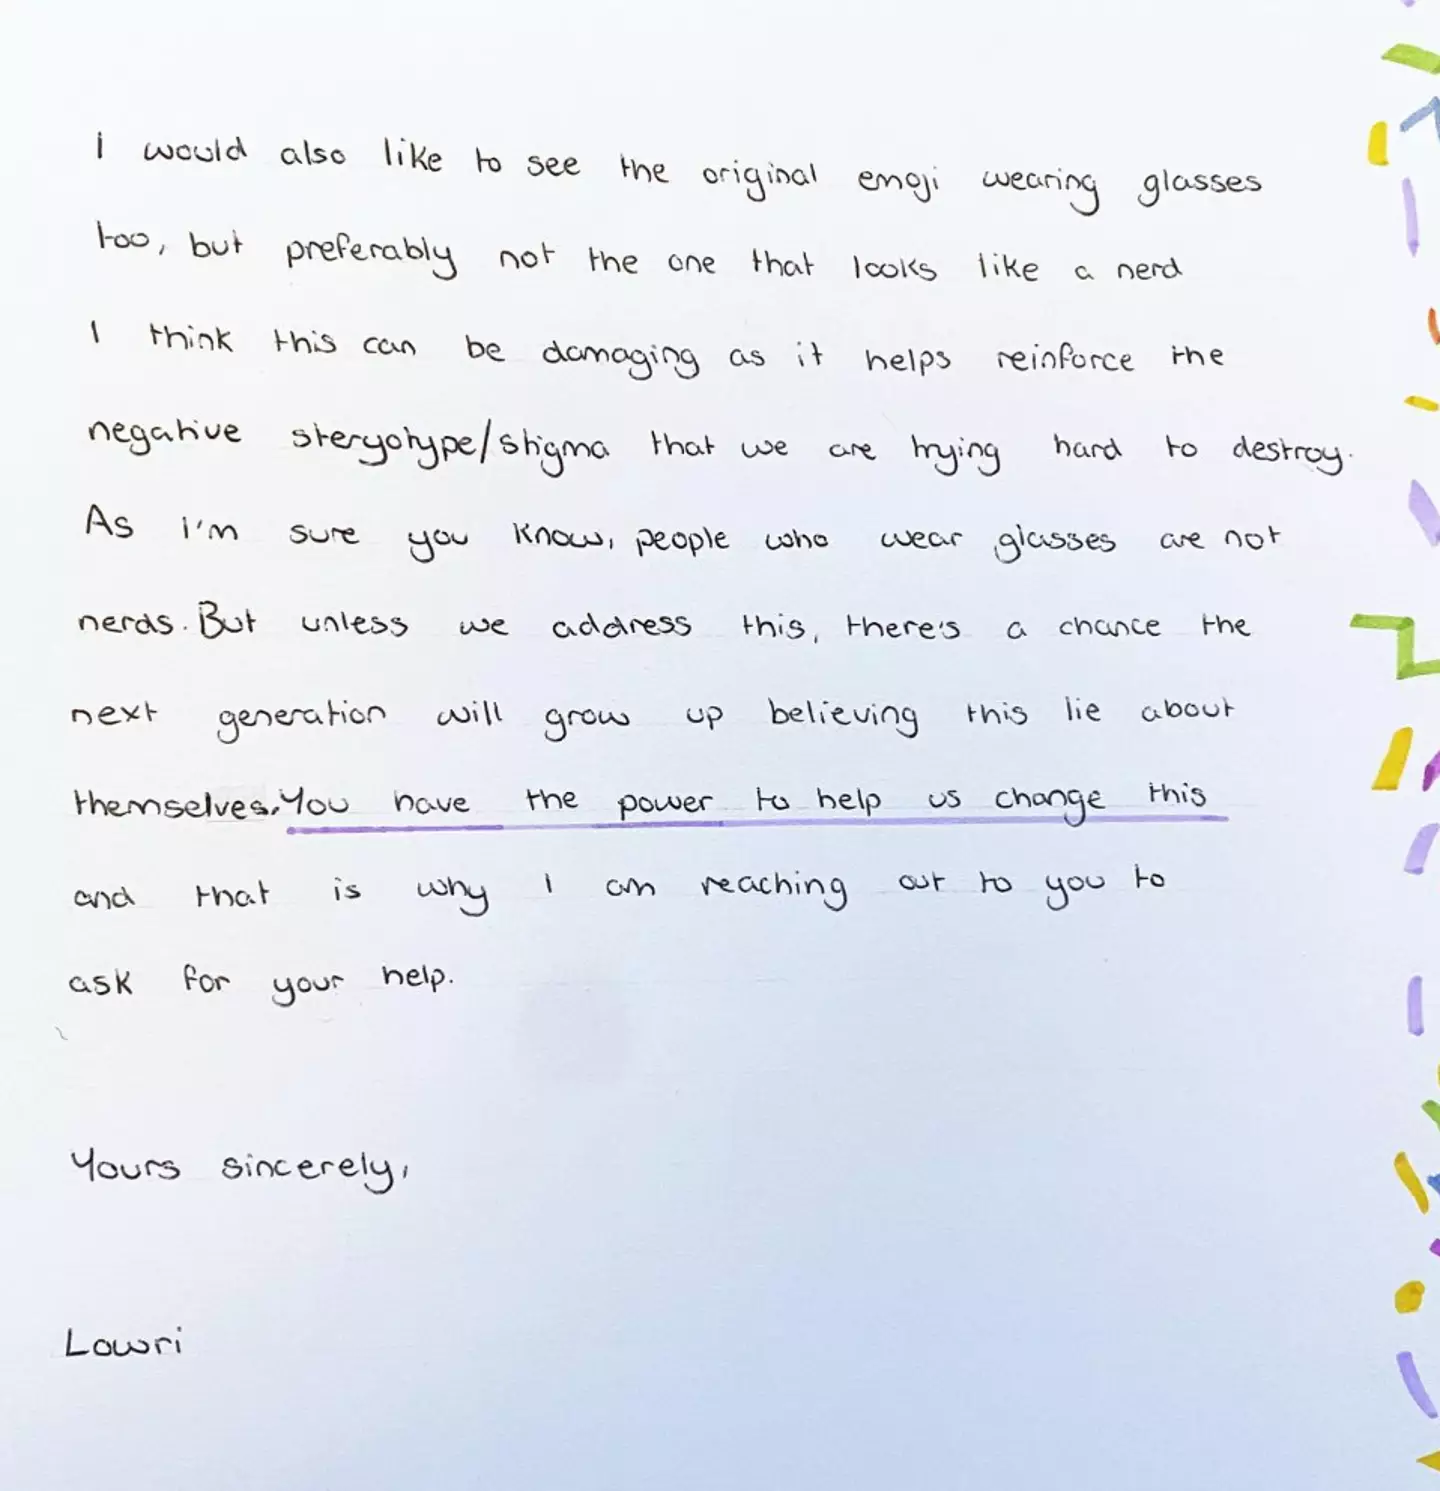 Lowri tagged Apple, Facebook and Google in her social media post of her letter.